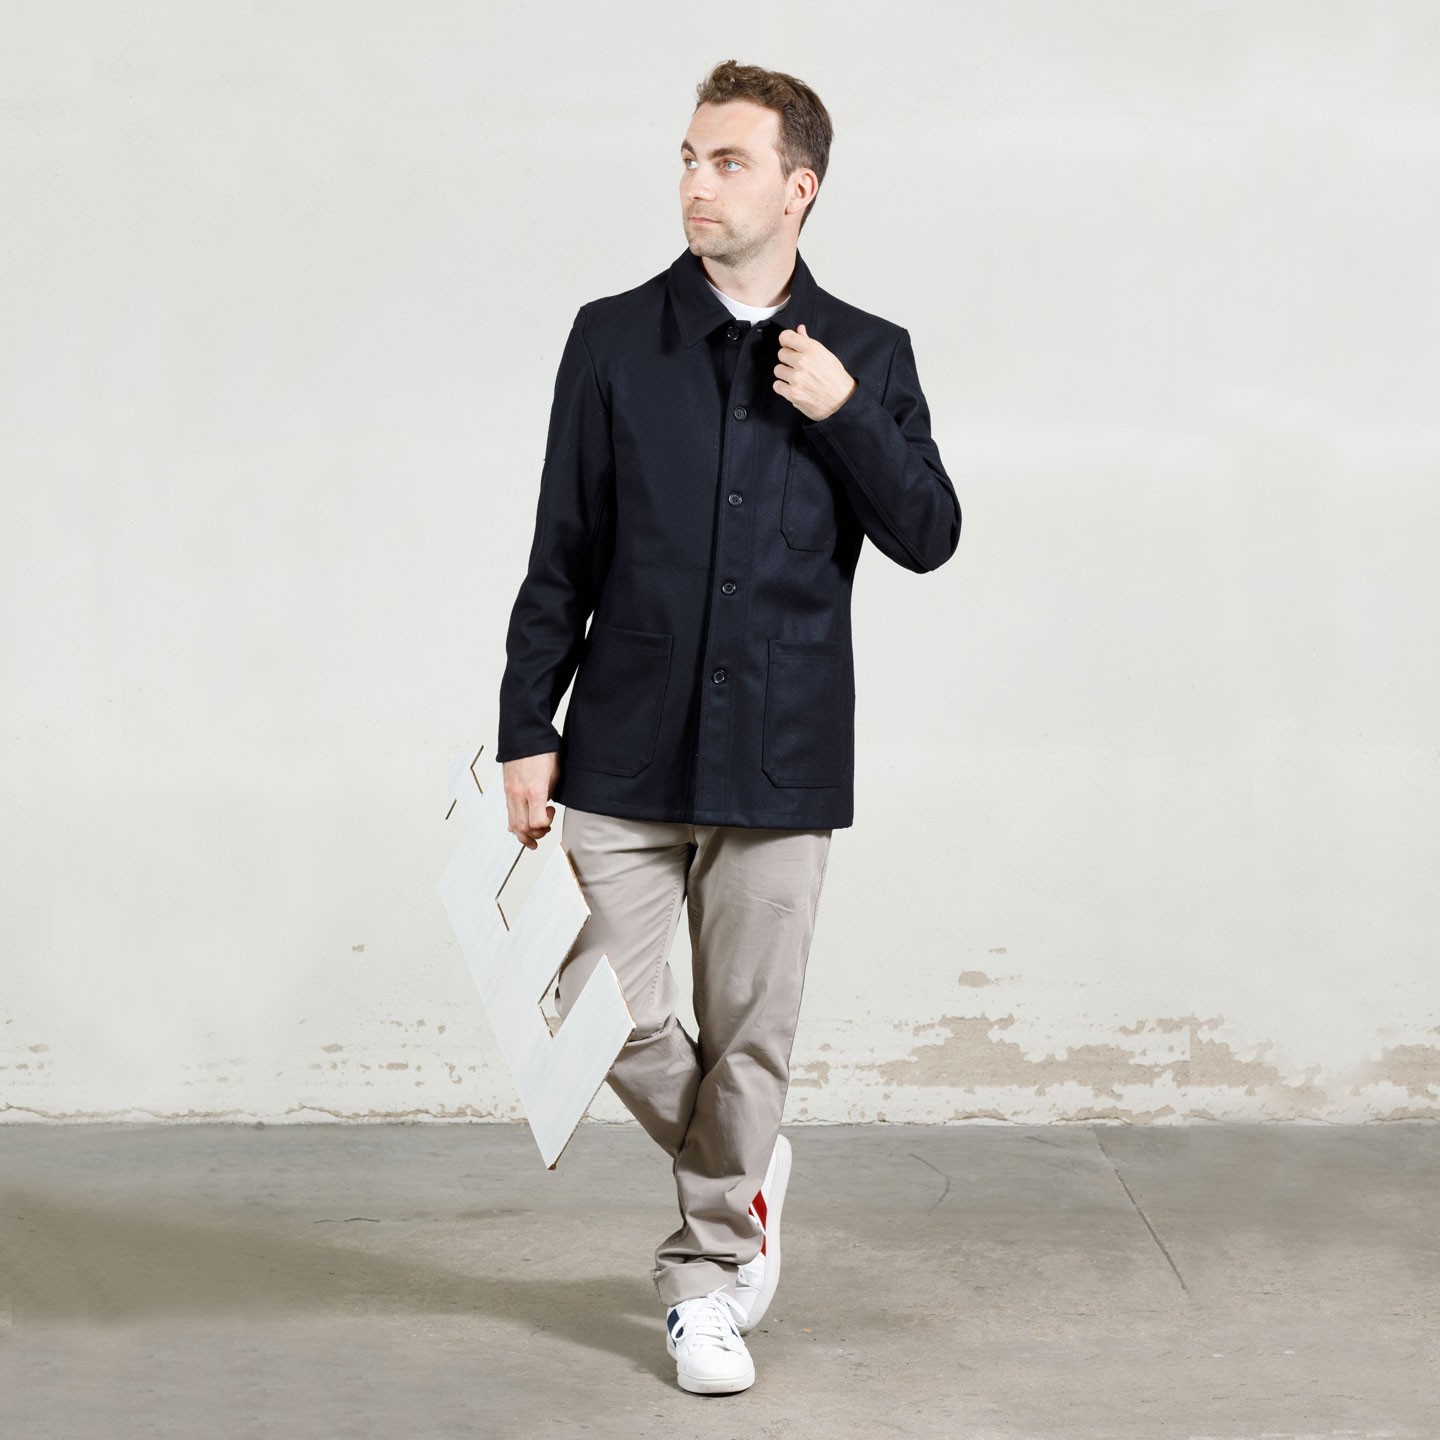 100% Wool melton french workwear jacket - VETRA 100% Made in France